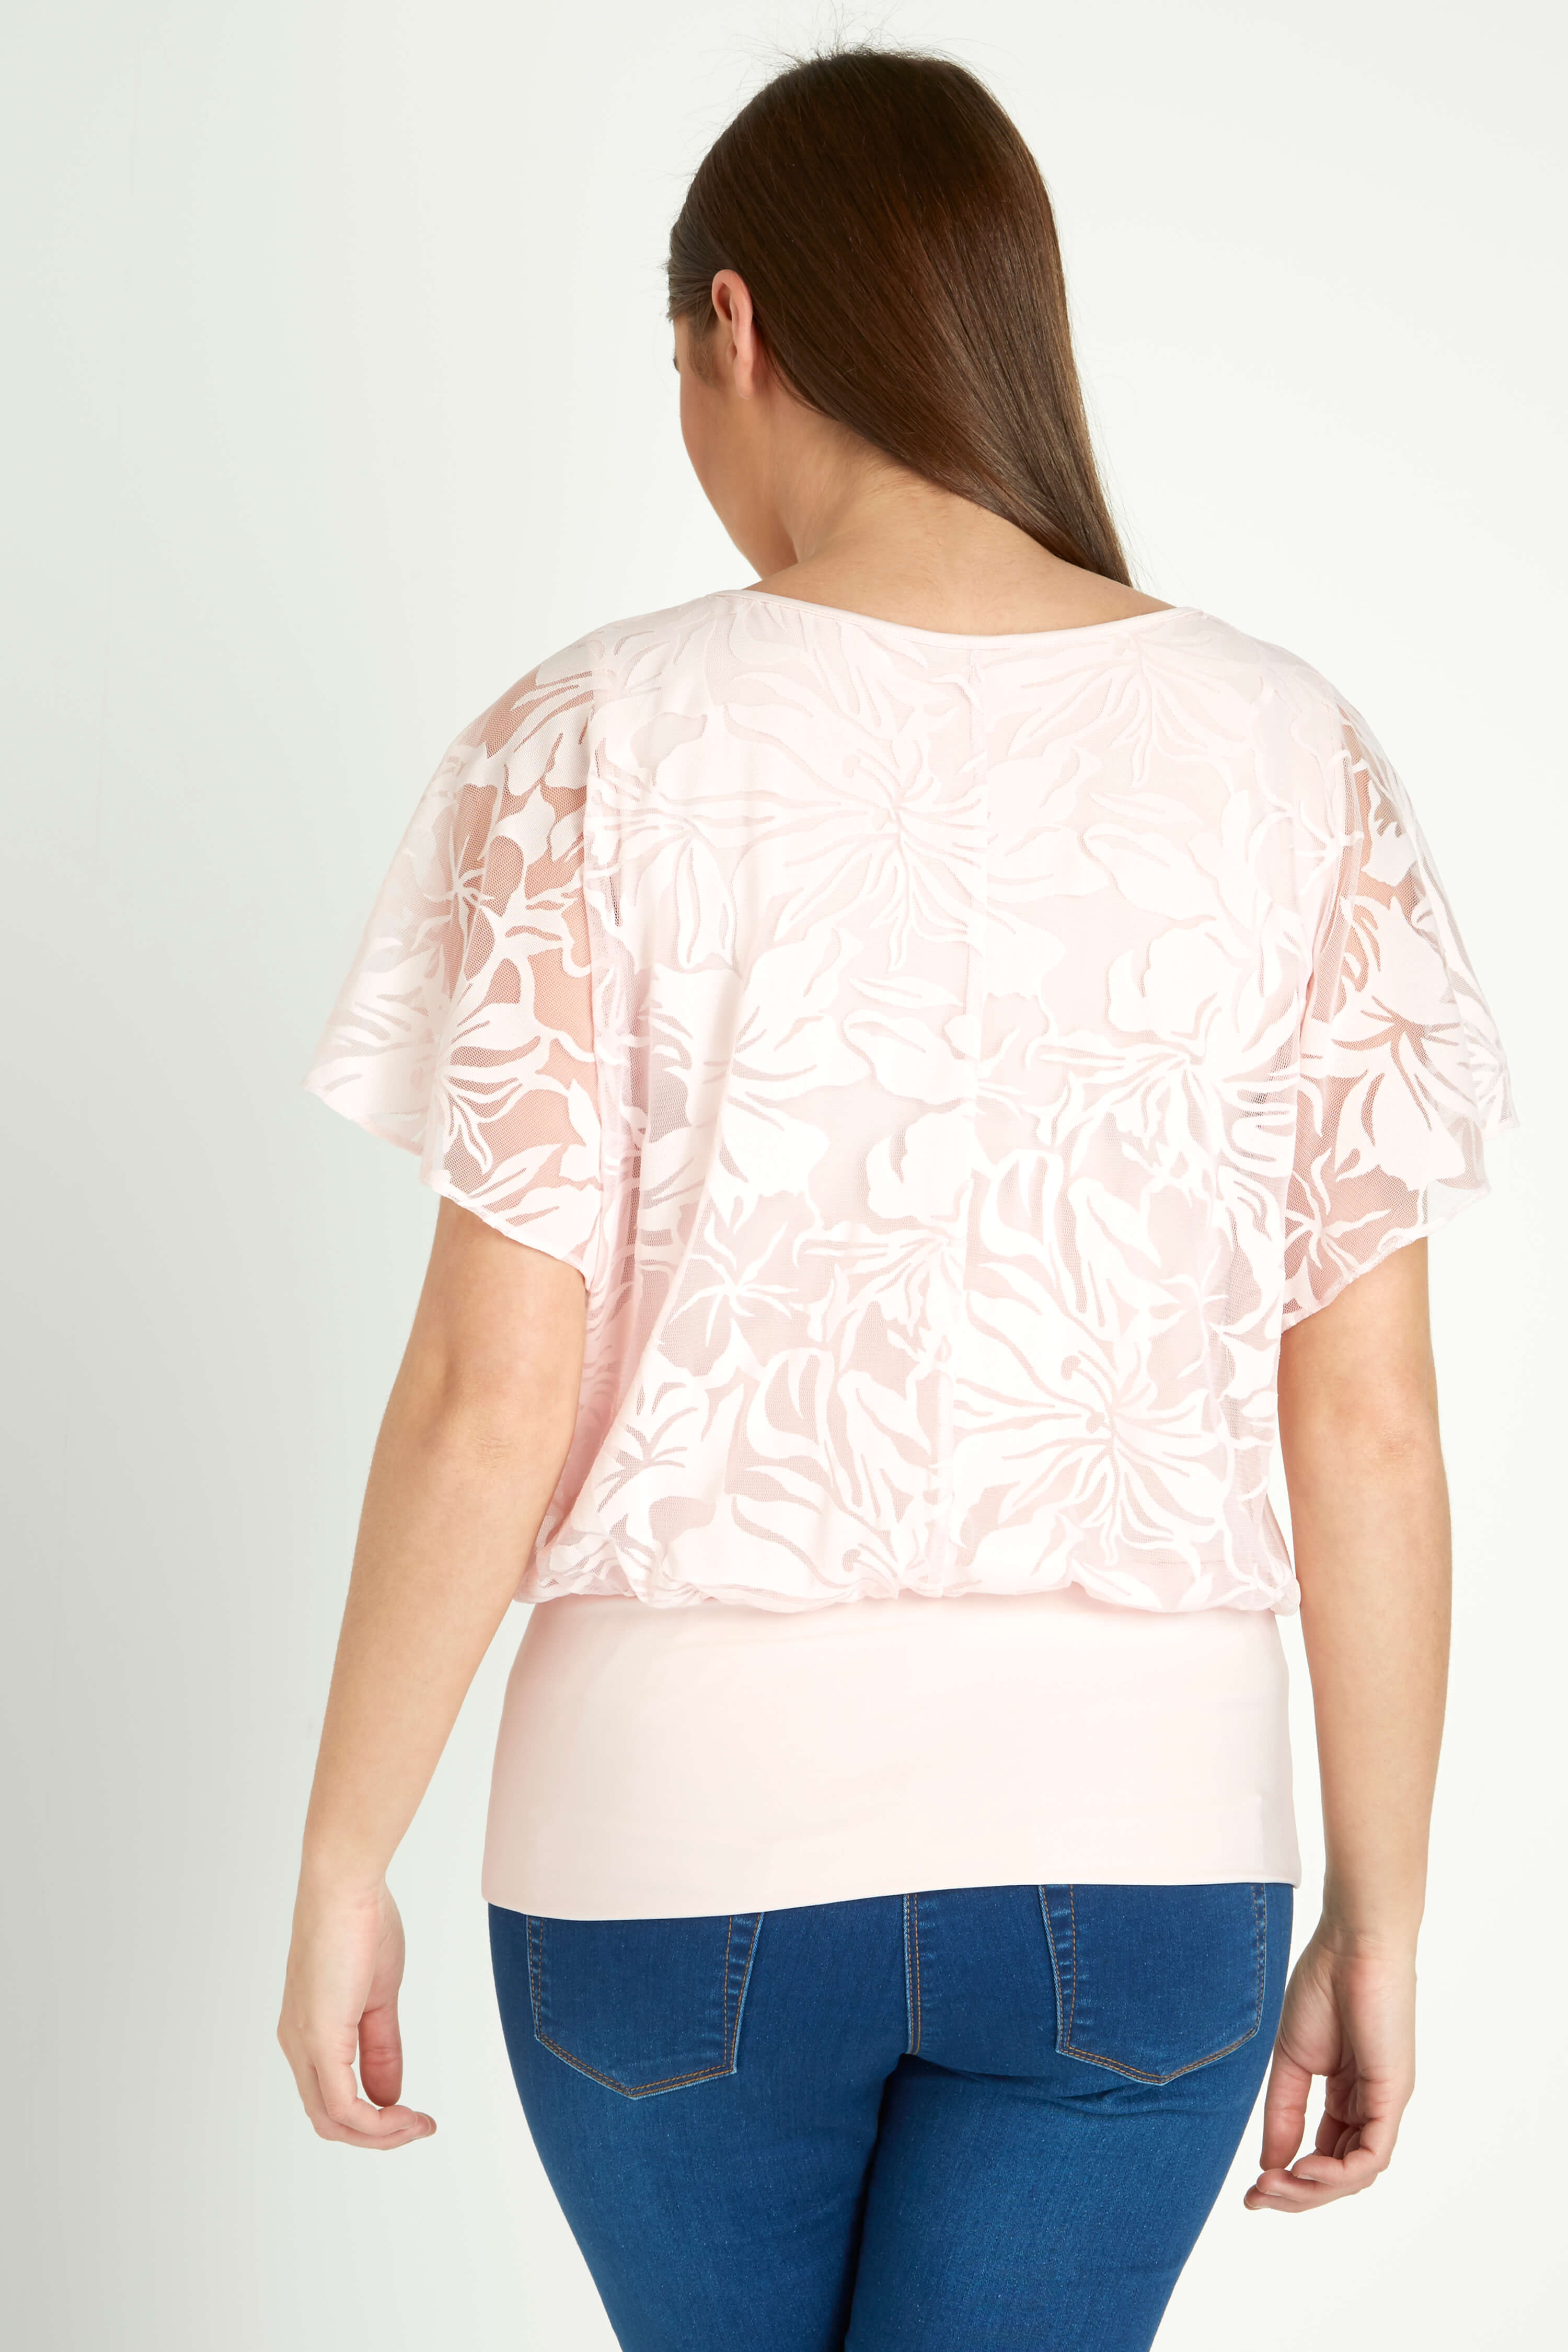 PINK Floral Double Layer Burnout Print Top, Image 2 of 5